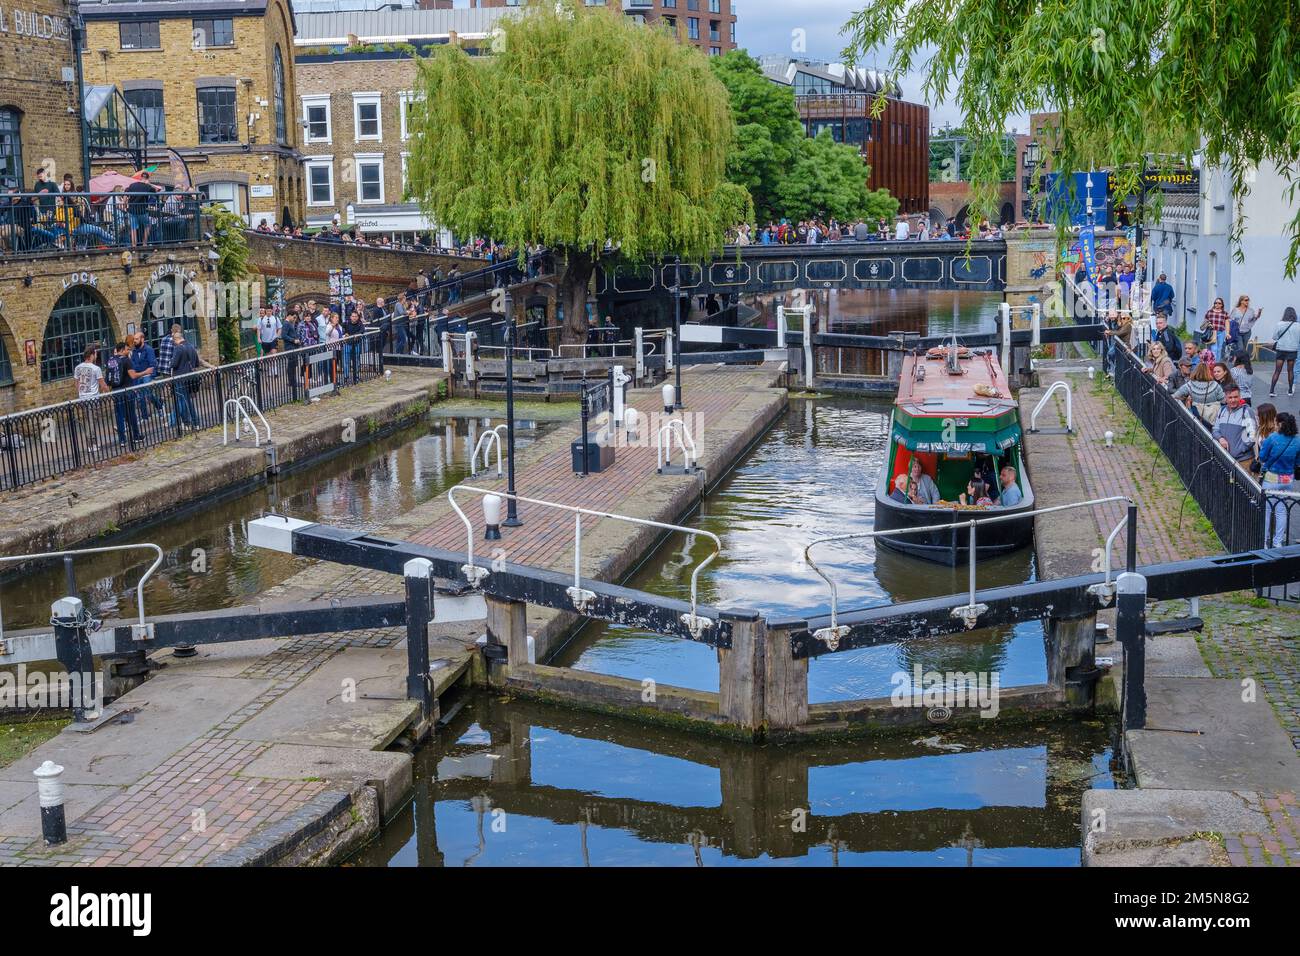 A leisure narrowboat approaches the lock gate at Camden Lock on Regent’s Canal, Camden Town, a popular tourist destination in London, UK. Stock Photo